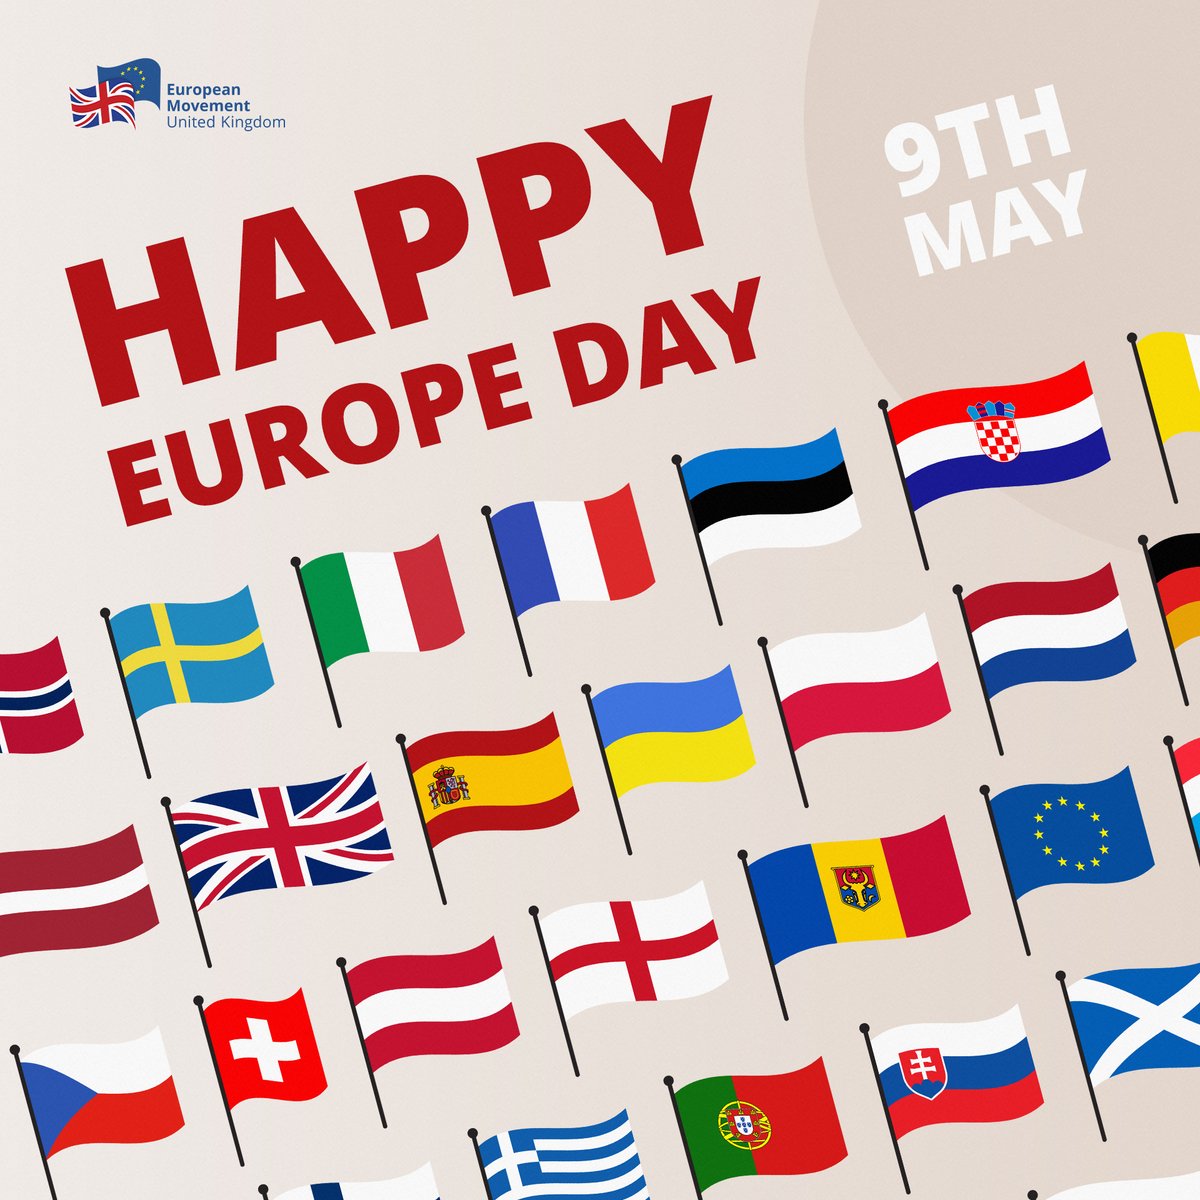 This Europe Day, let’s pledge to undo the divisions of Brexit and revive our commitment to European cooperation and unity for a stronger future.